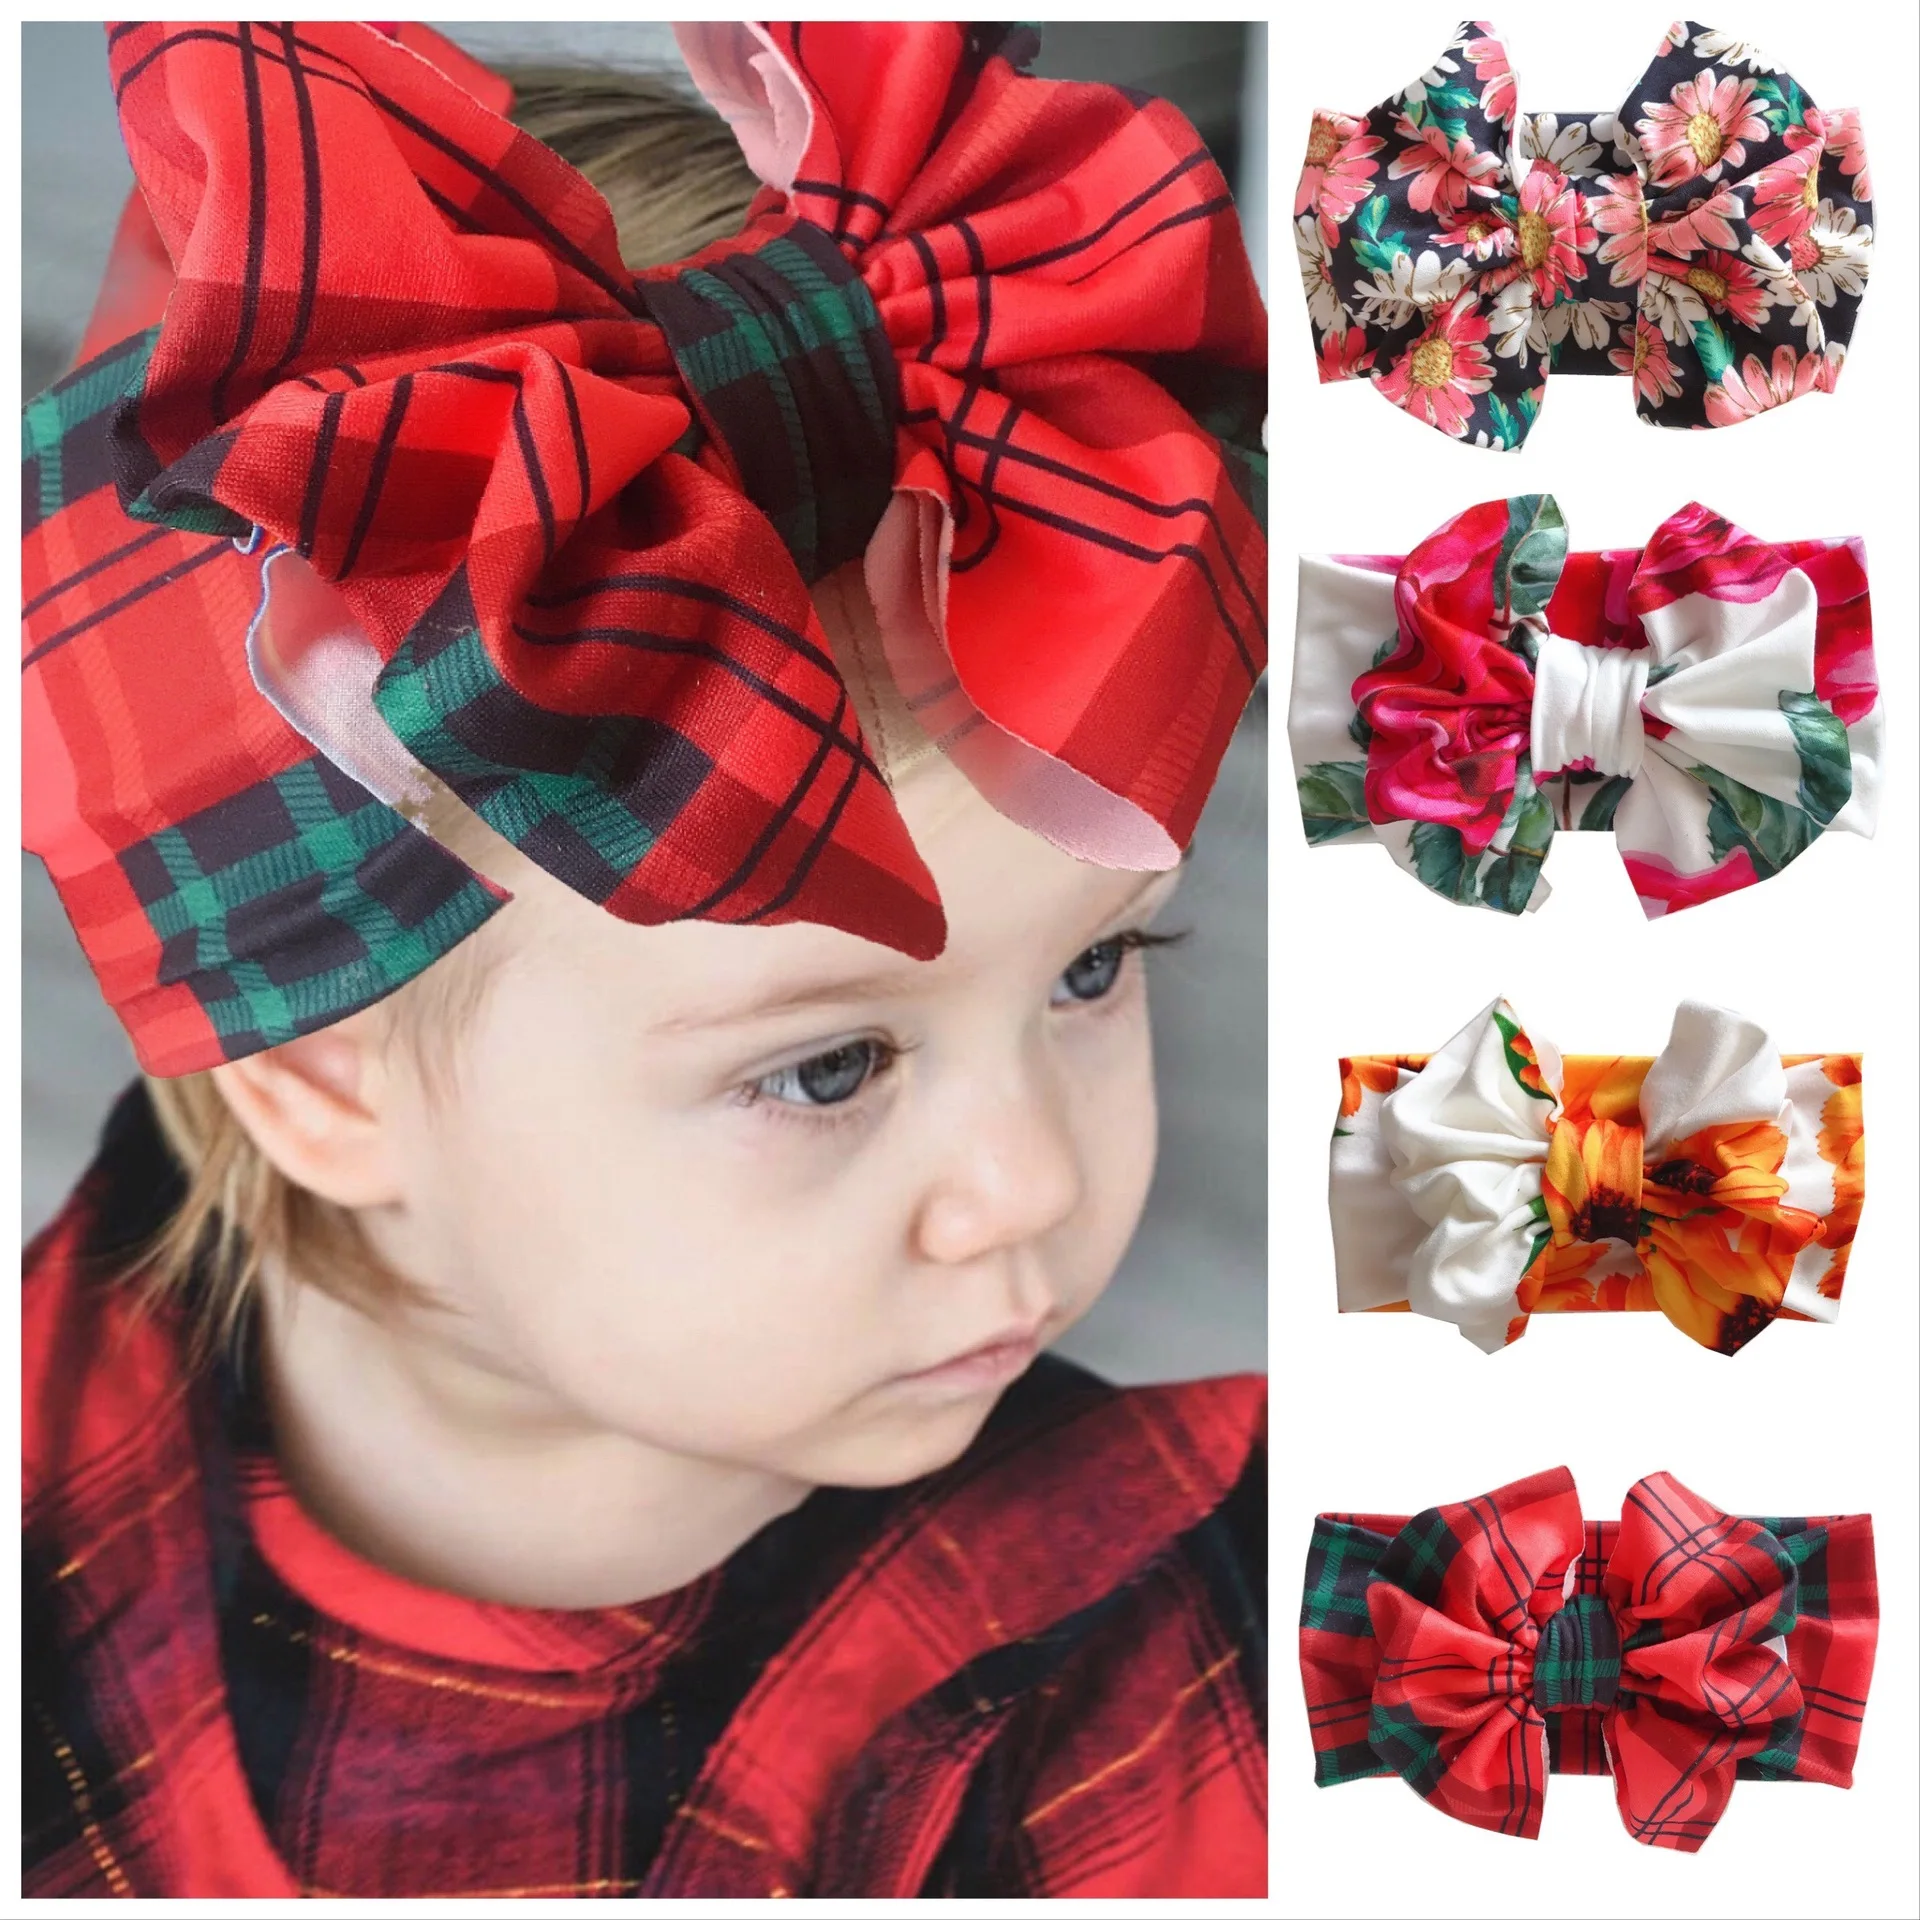 New Baby Girls Boys Bows Headbands Large Bow Knotted Headband Children Printed Floral Plaided Hair Accessories Headwrap